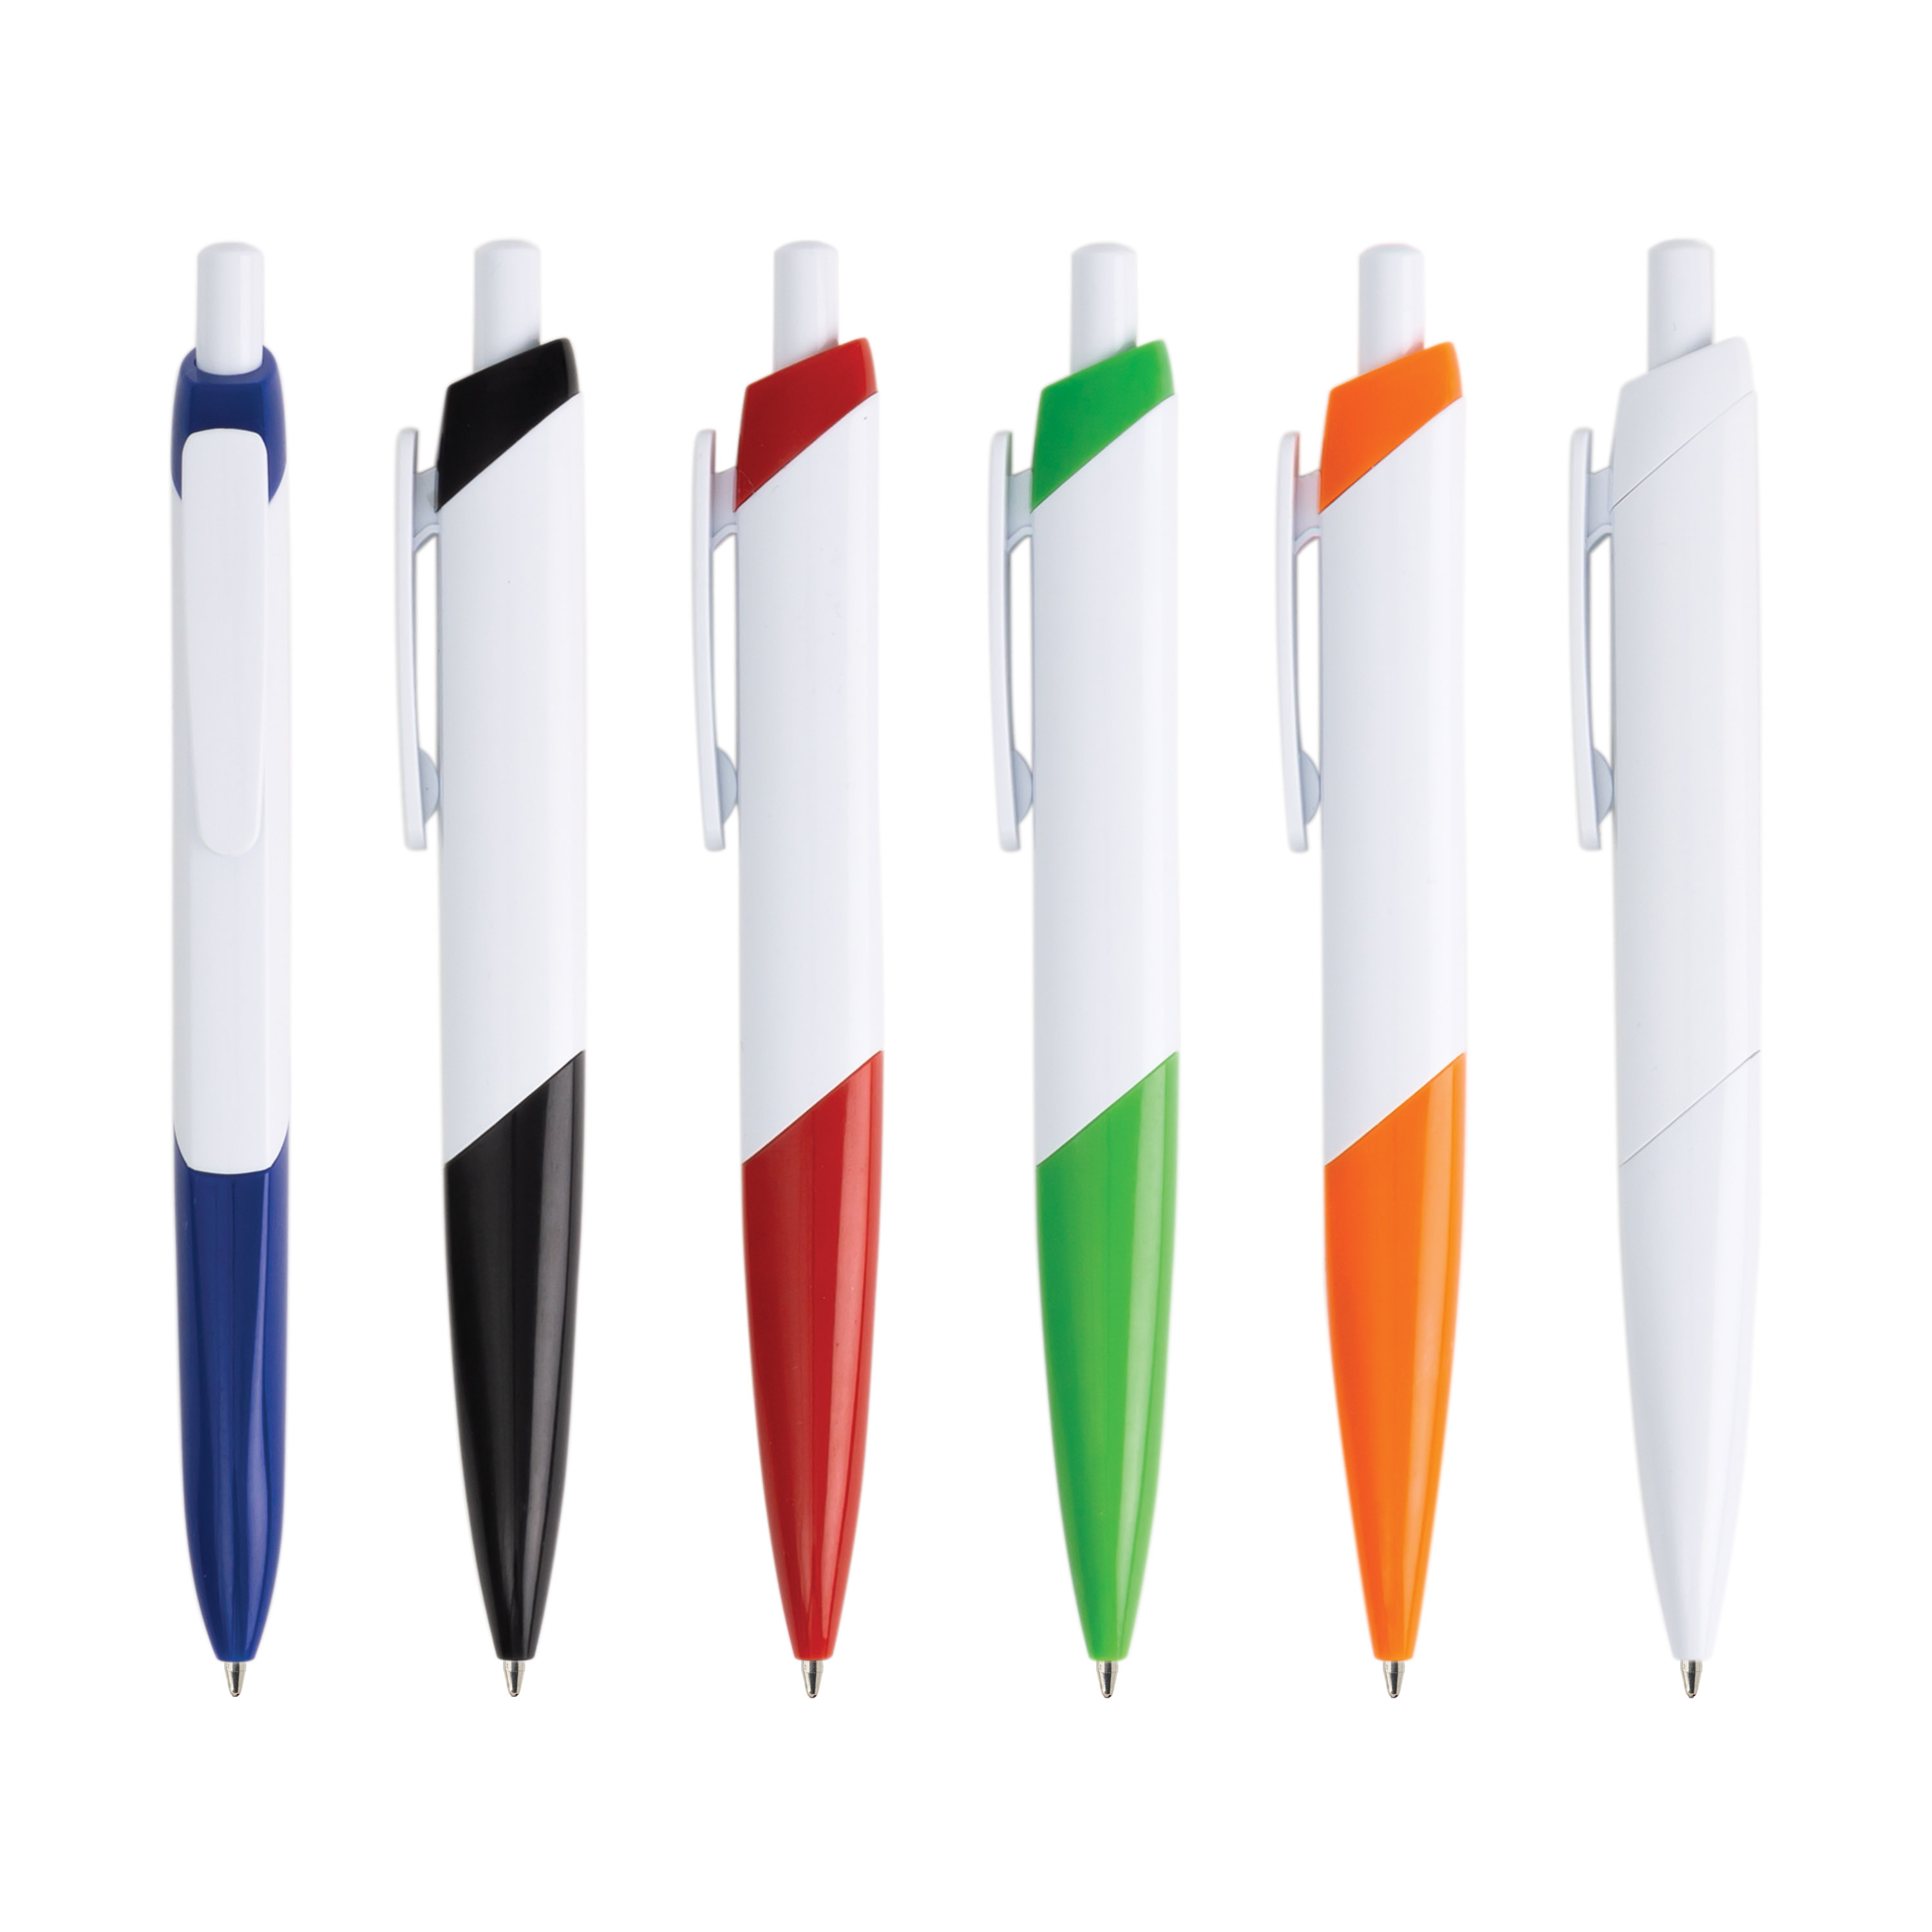 Cynthia push-action ballpoint pen with registered antimicrobial additive - HW204